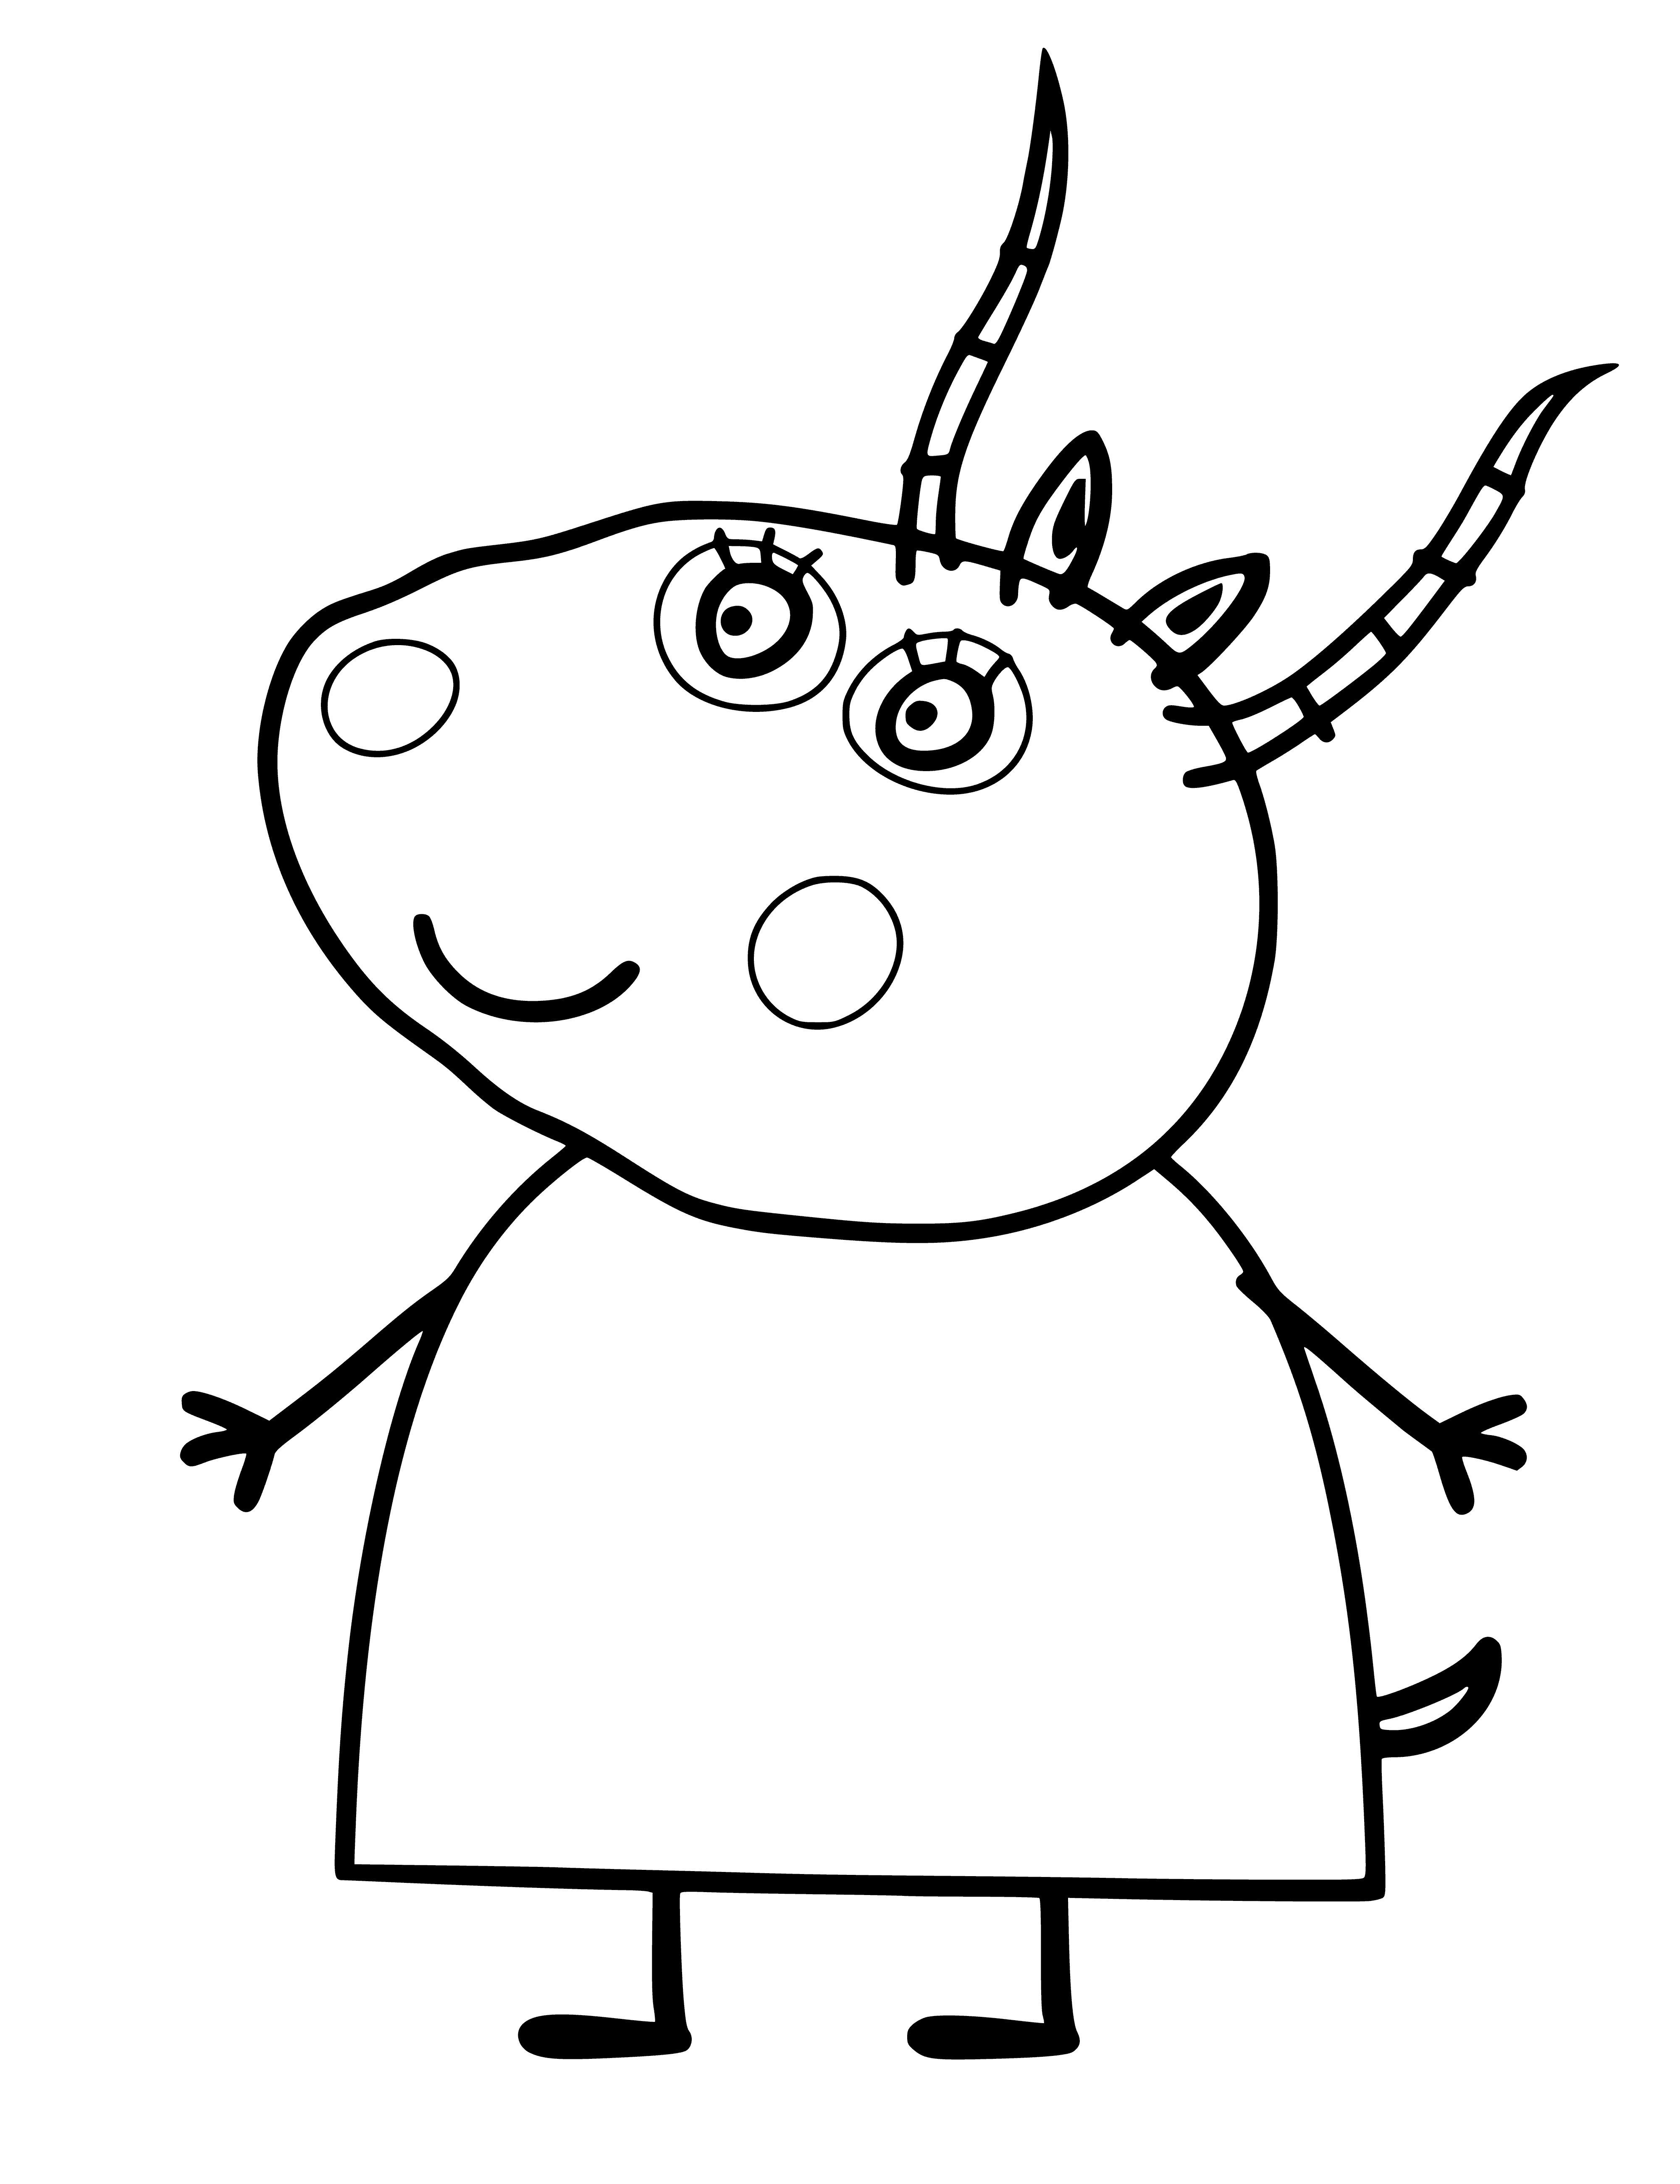 coloring page: Madame Gazelle is a teacher wearing a dress and scarf with a big smile. #coloringpage